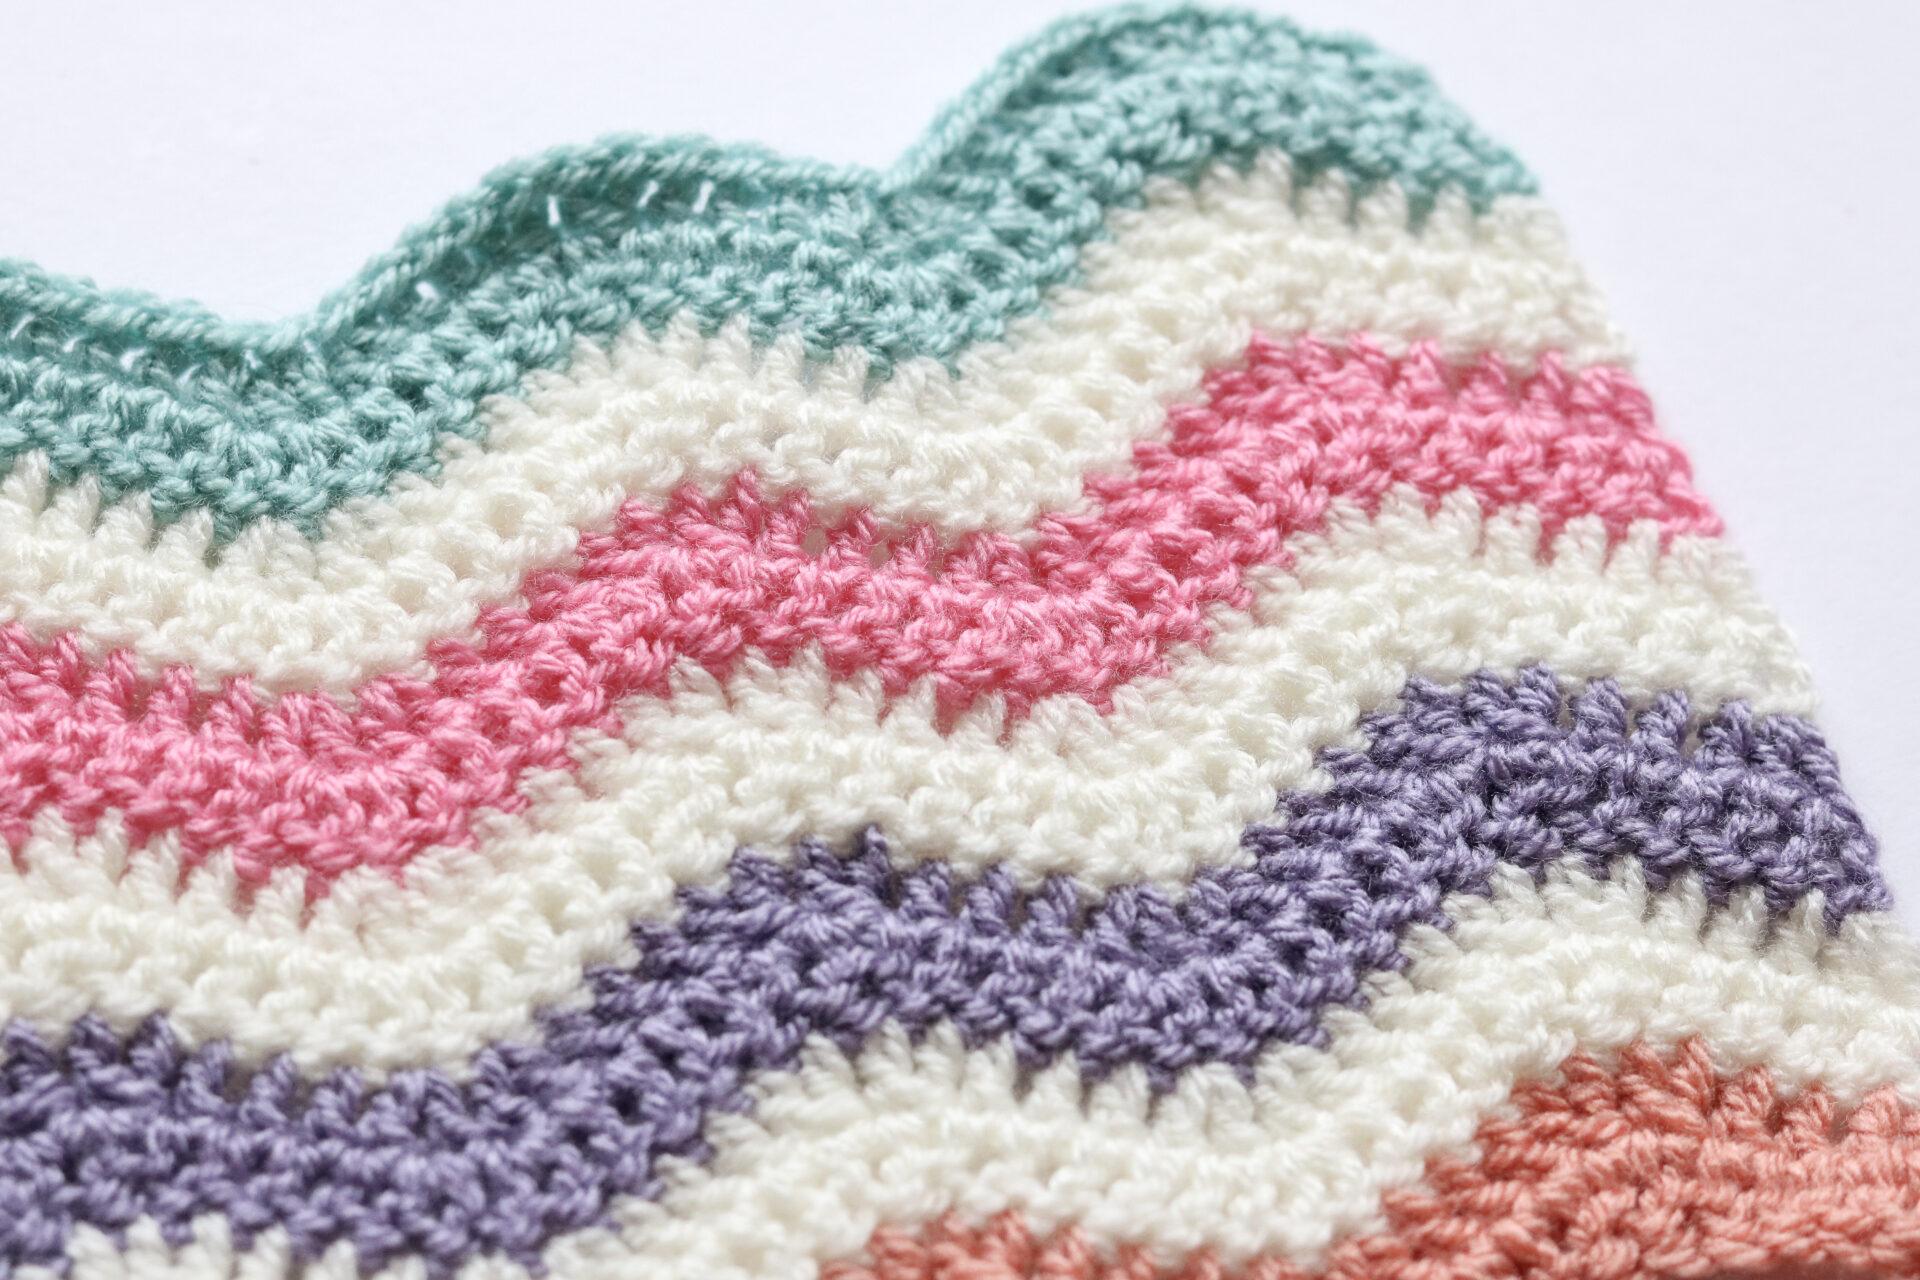 A swatch of ripple stitch in shades of white, pink, aqua, purple and peach.